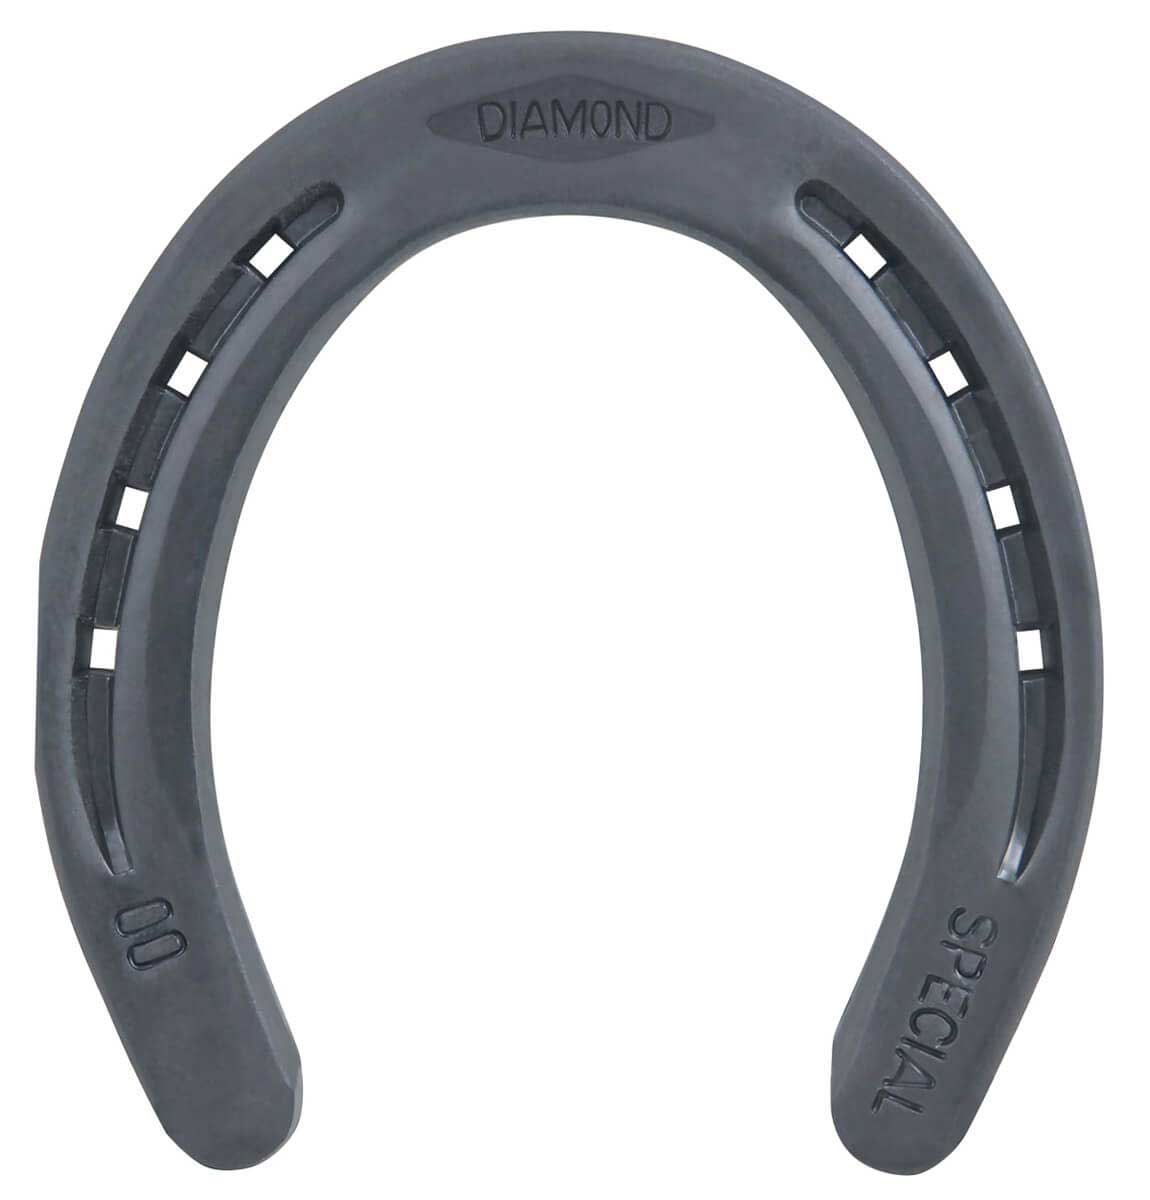 Diamond Special Plain Horseshoes by Diamond Farrier Co, 00 (4 3/4 x 4 3/8) 2 ct DS00